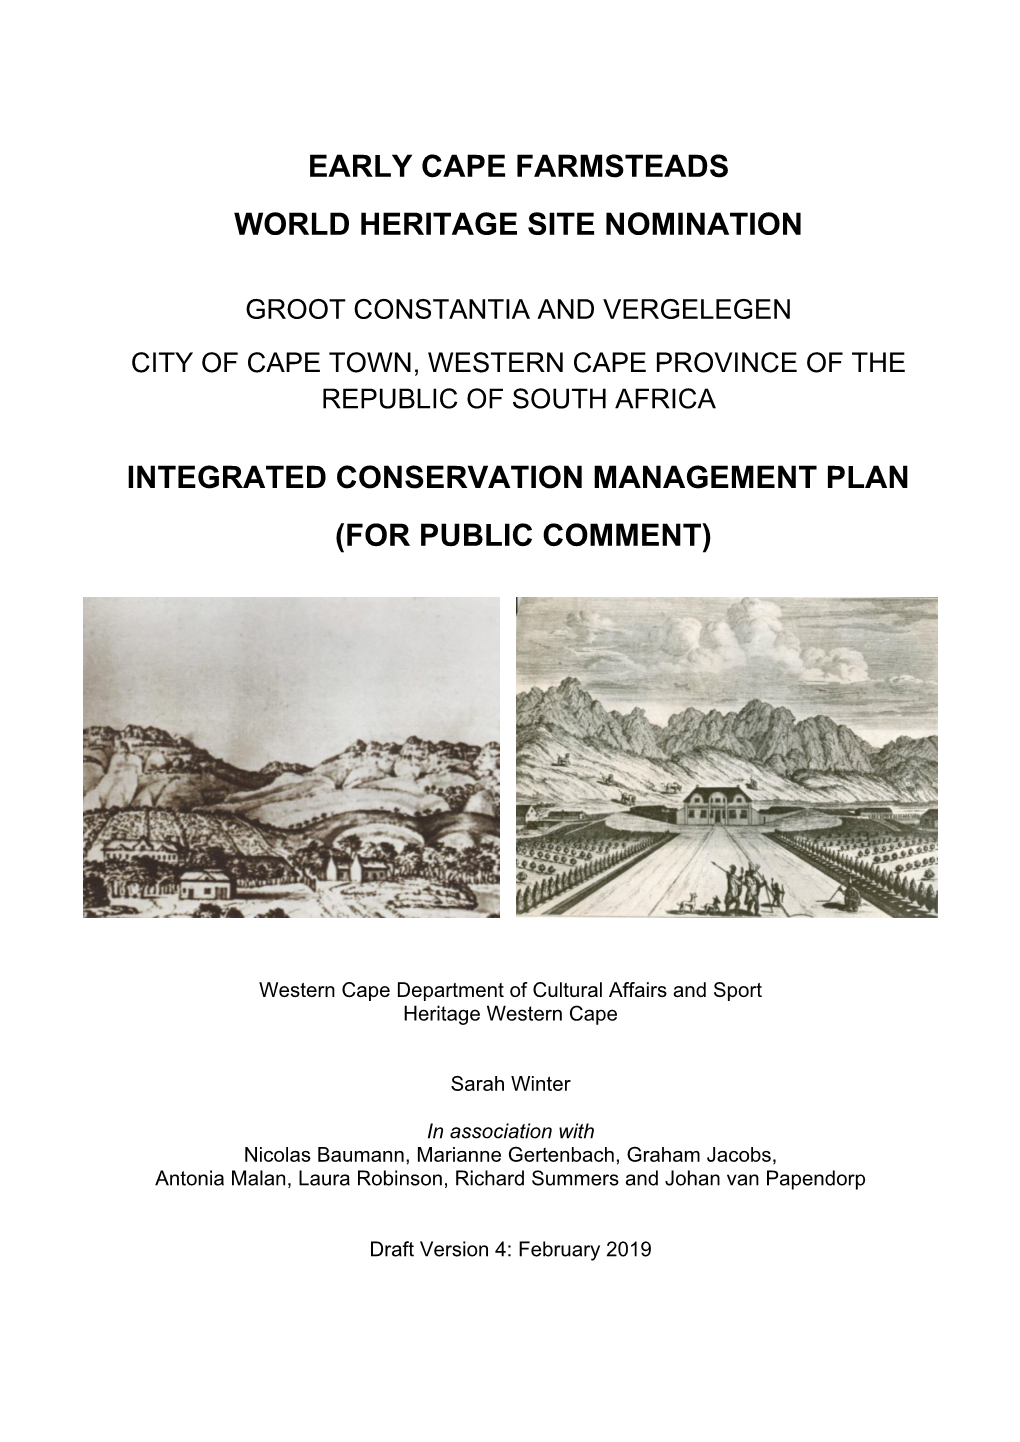 Early Cape Farmsteads World Heritage Site Nomination